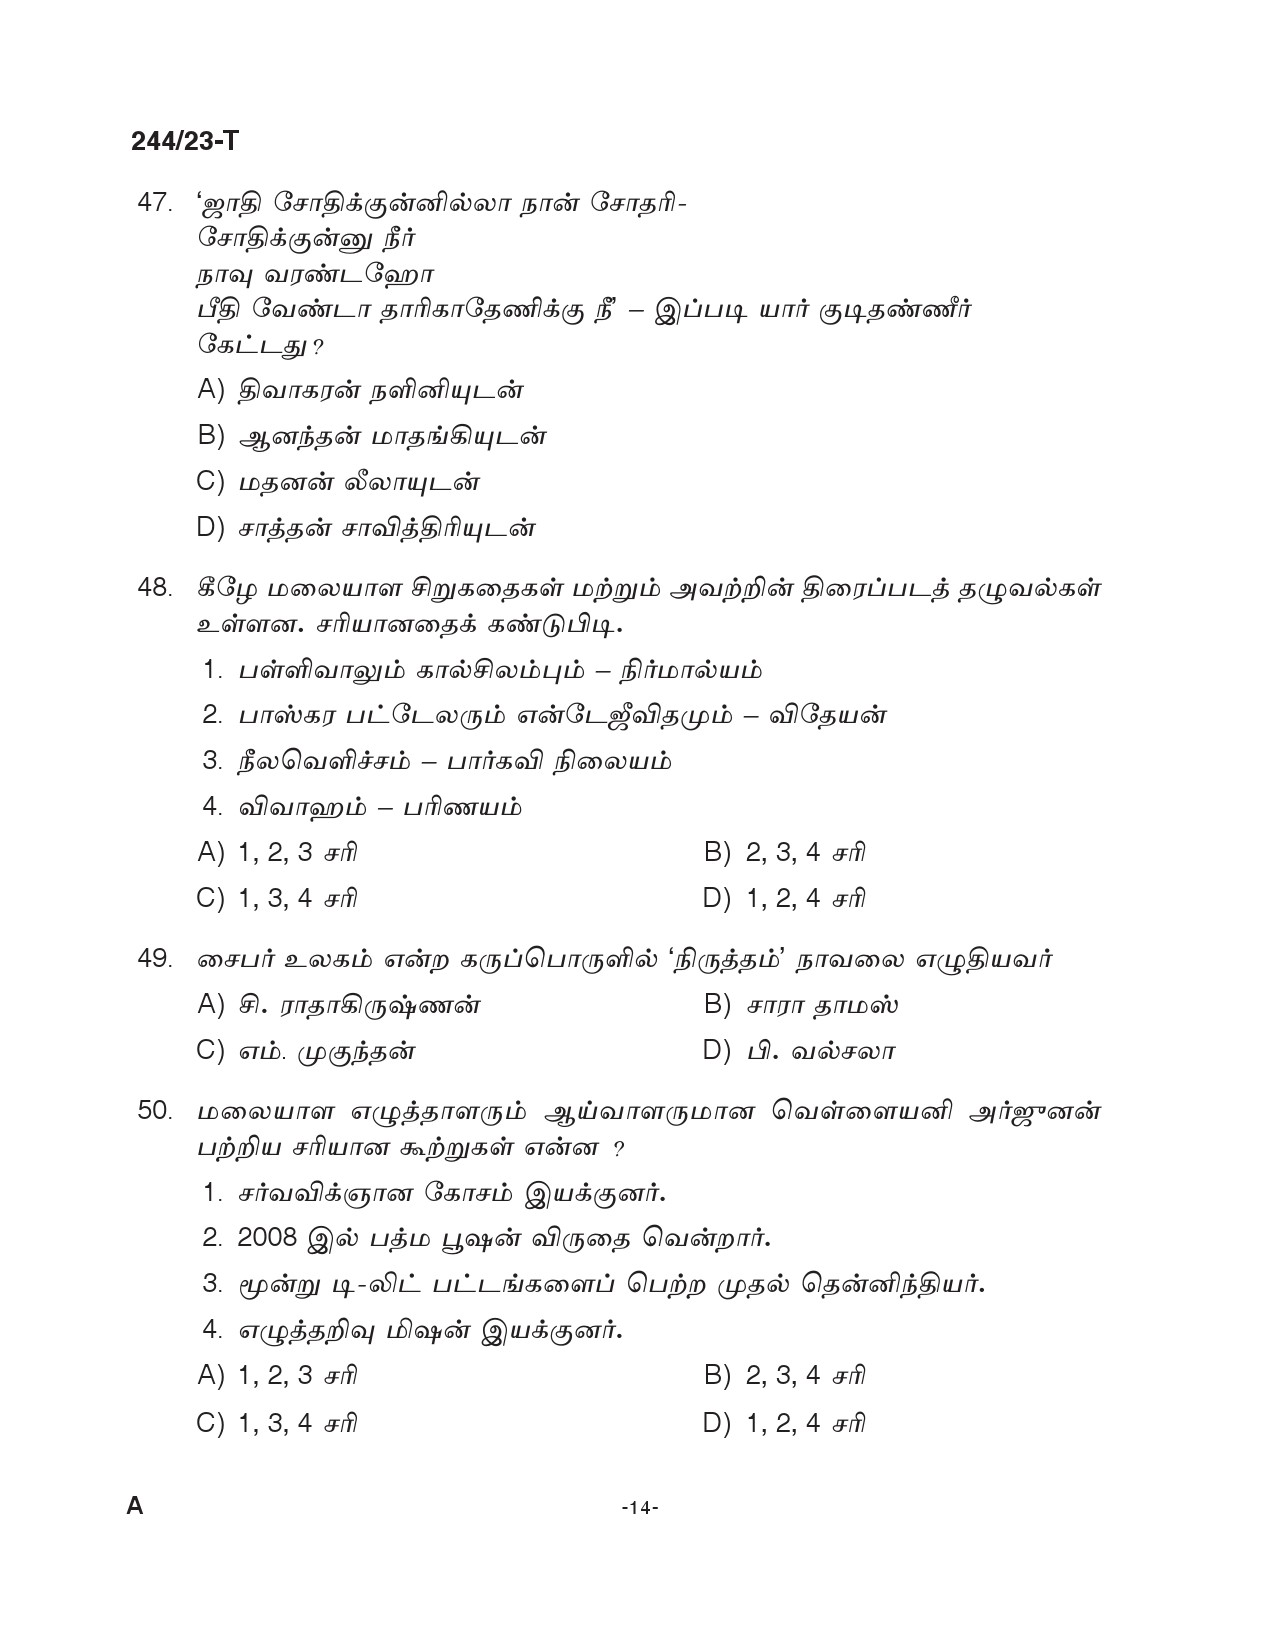 KPSC Fire and Rescue Officer Trainee Tamil Exam 2023 Code 2442023 T 13